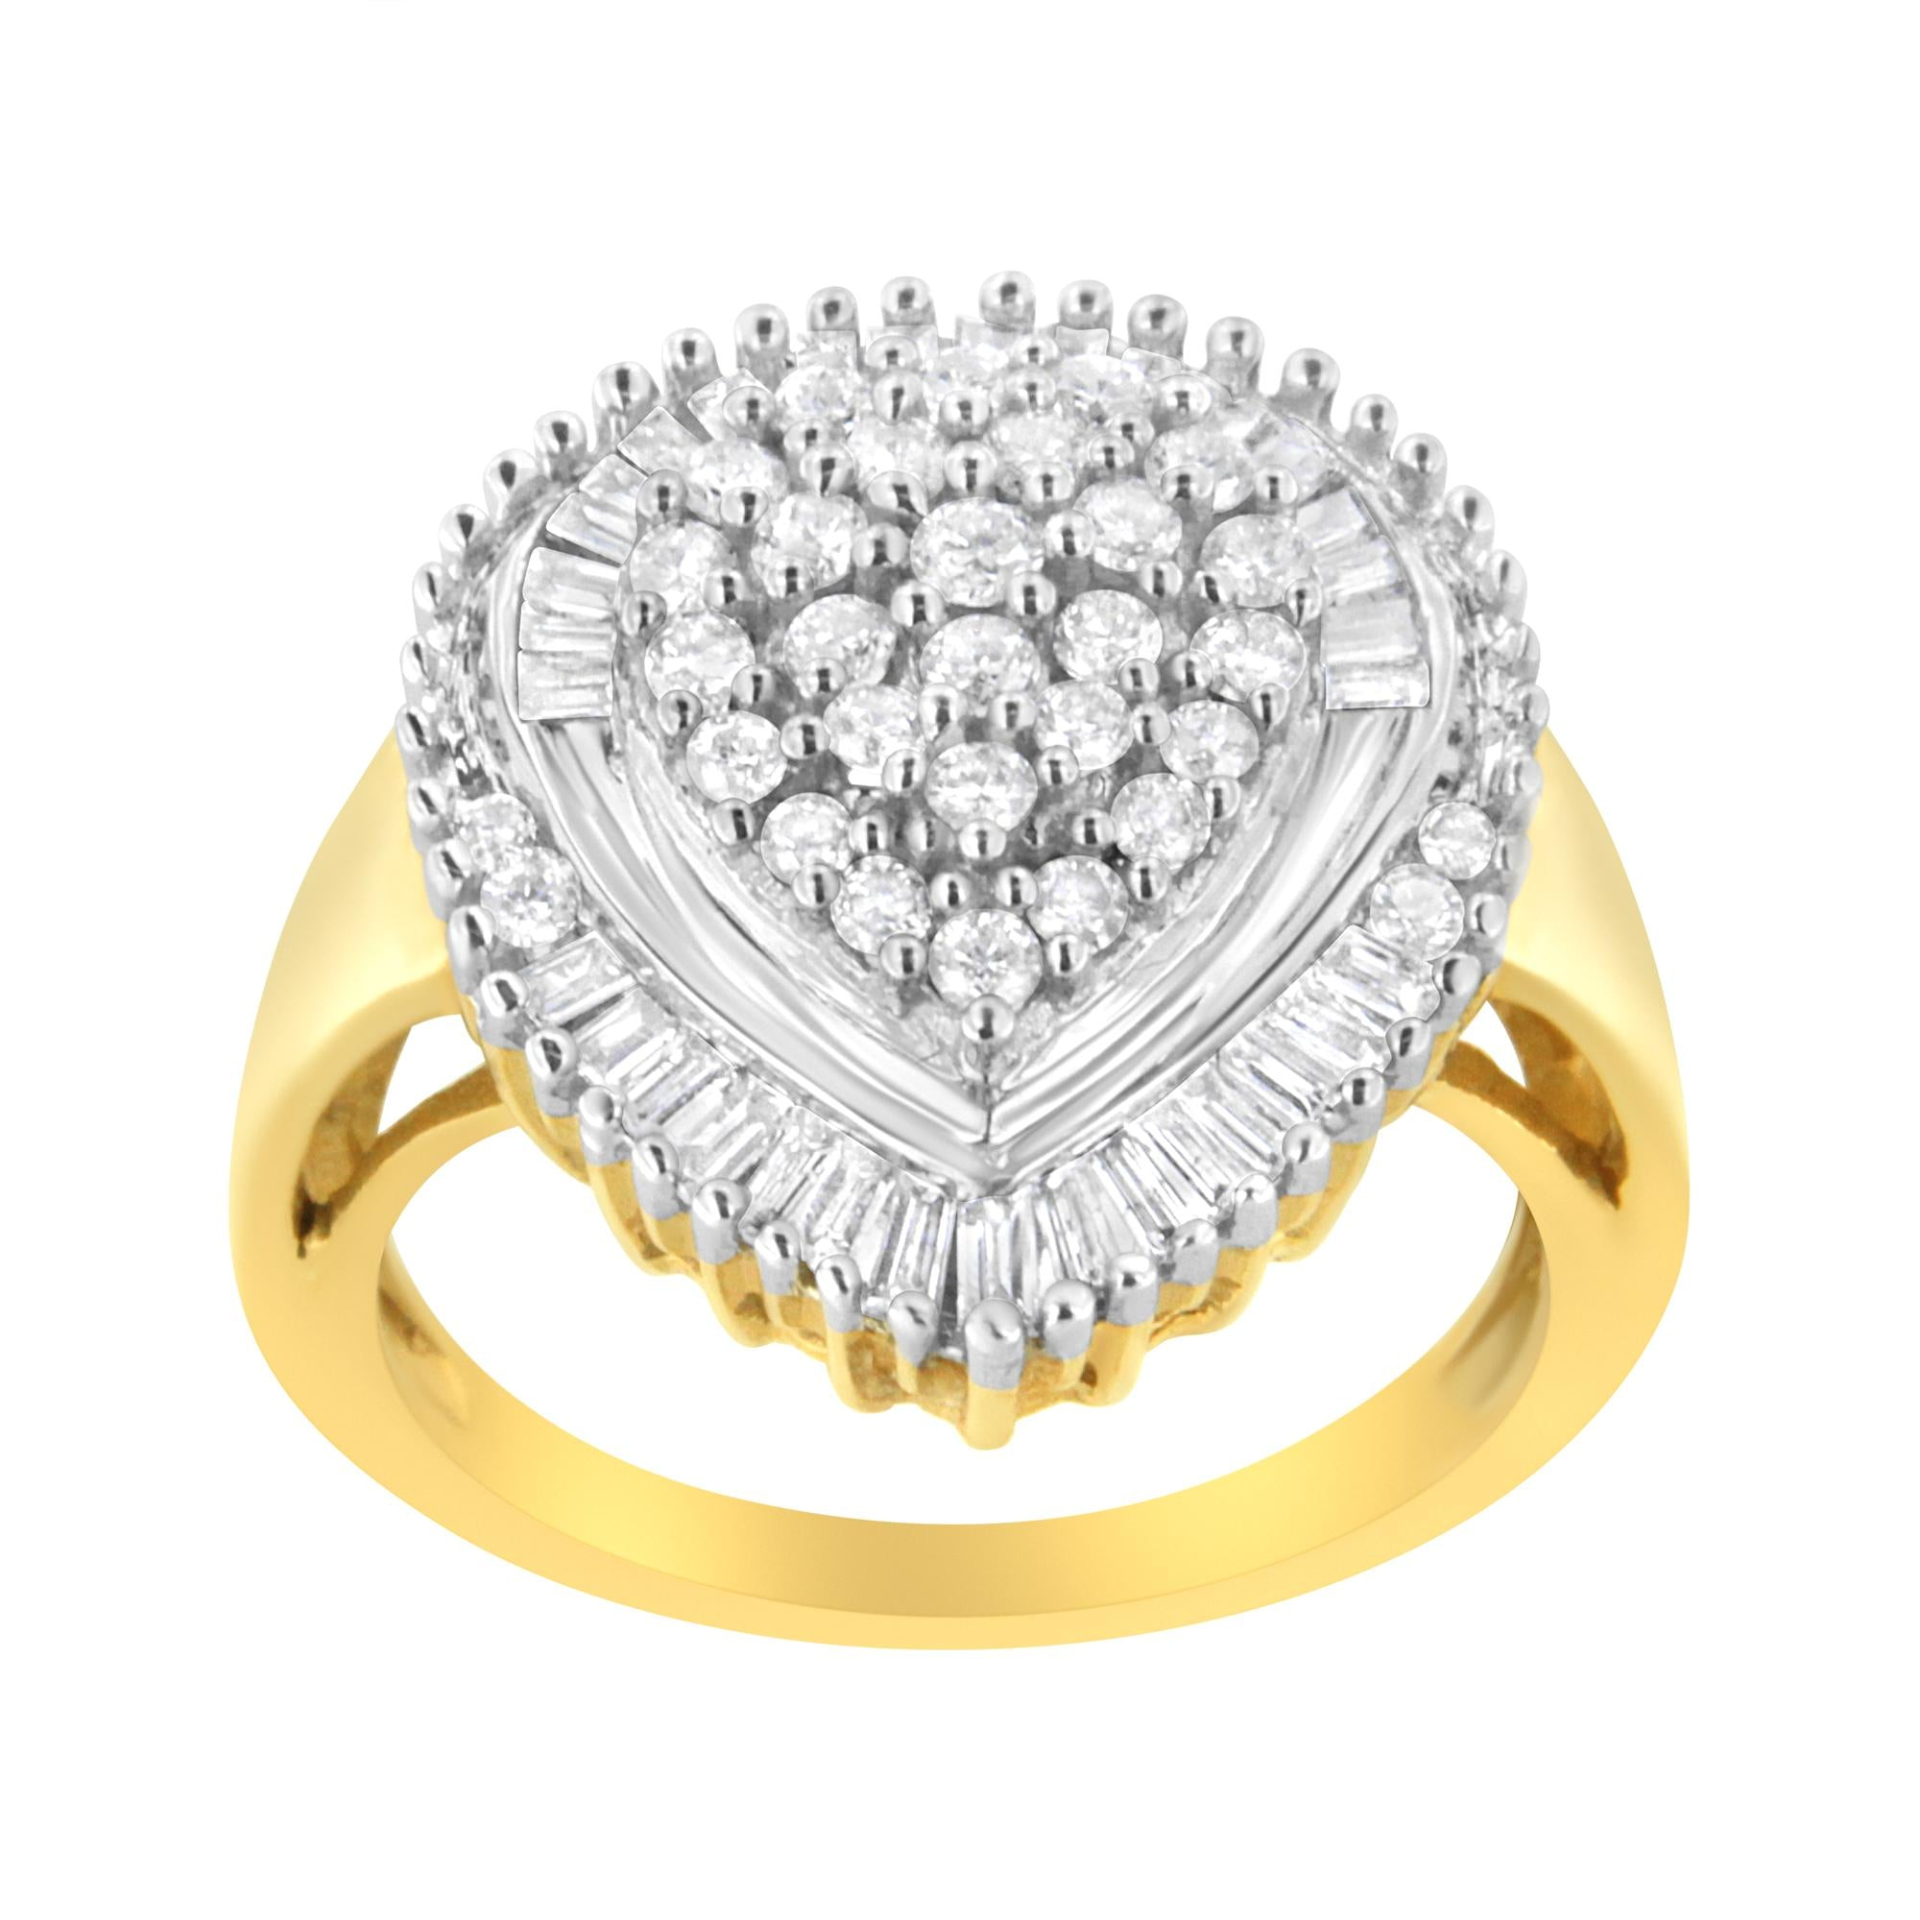 10K Yellow Gold 1.0 Cttw Round and Baguette Cut Diamond Oval Shaped Cluster Ring (I-J Color, I1-I2 Clarity), Goodies N Stuff